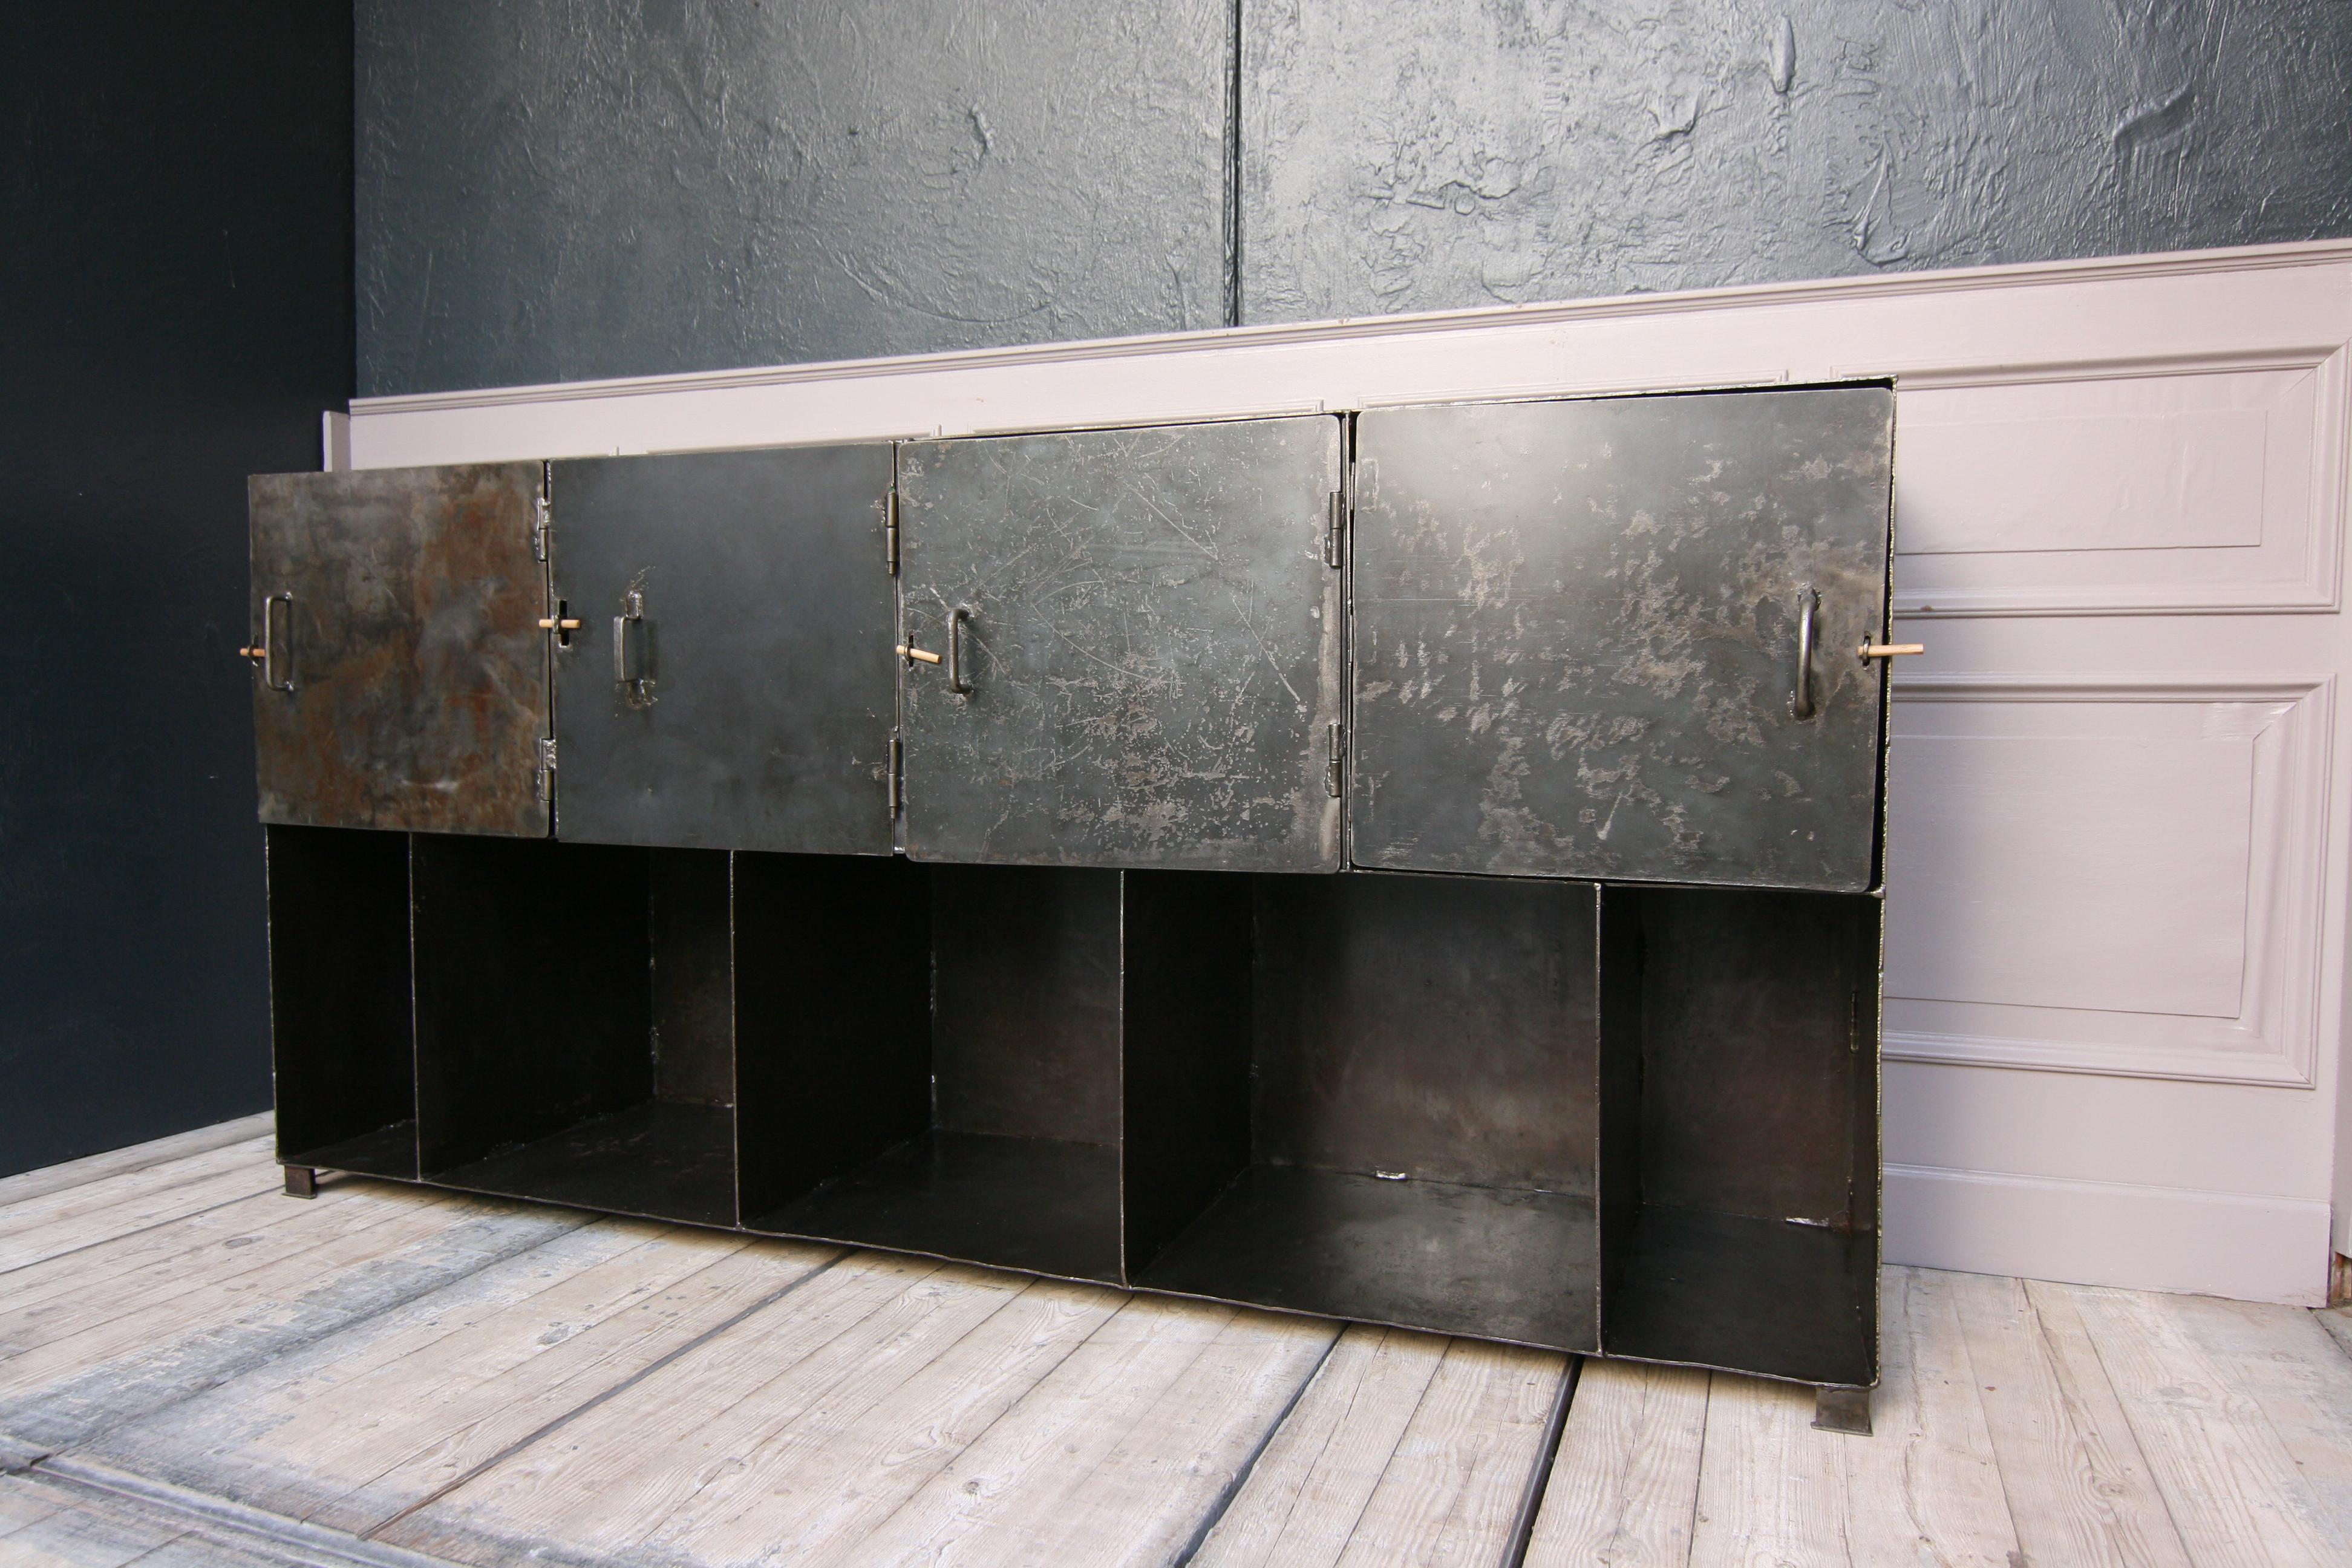 A late 20th century, very heavy solid shelf or sideboard made of metal.
4 doors above, open compartments below.